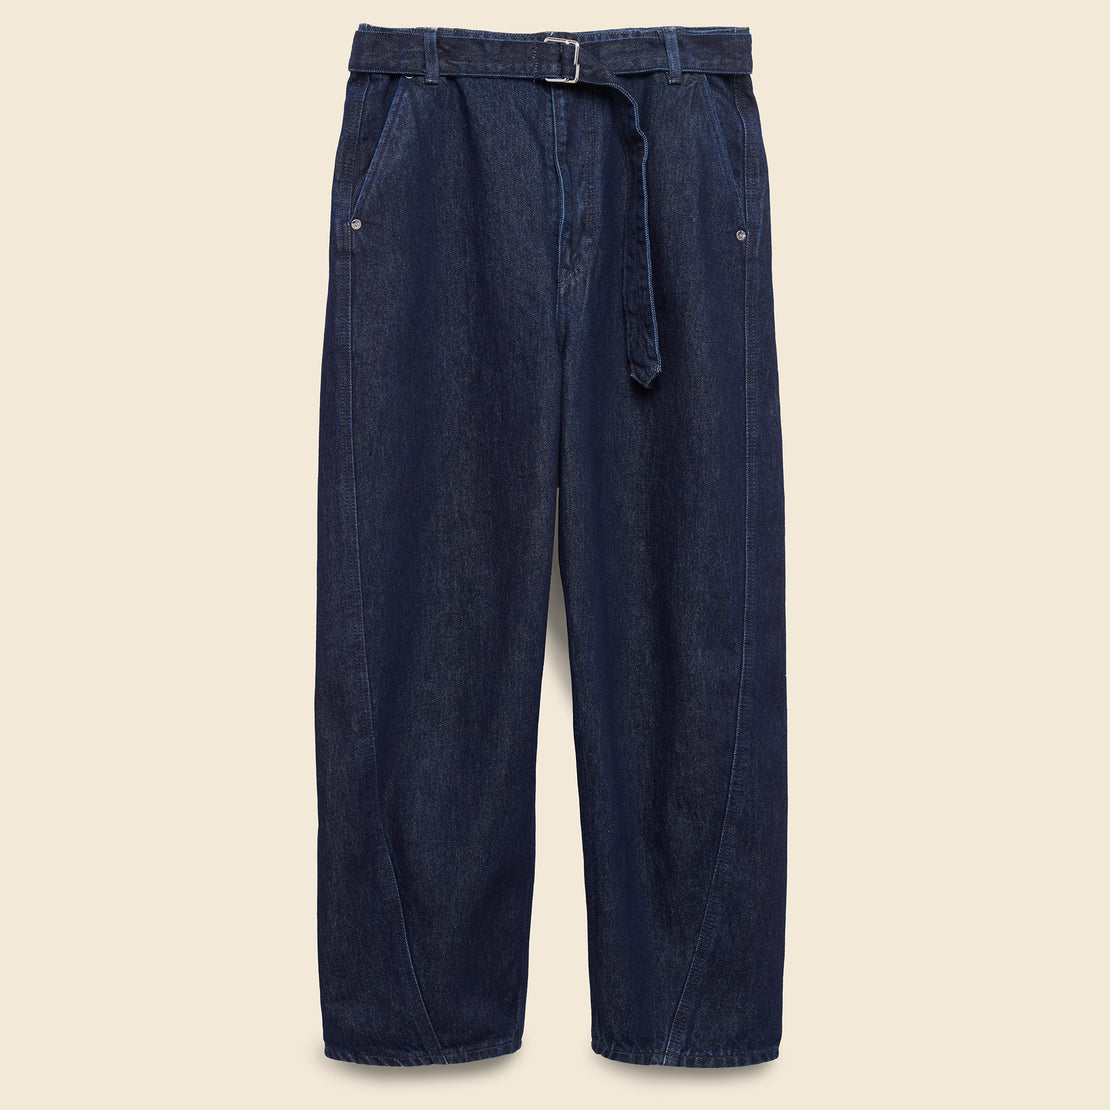 Levis Made & Crafted Carved Denim Trouser - Deep Rinse